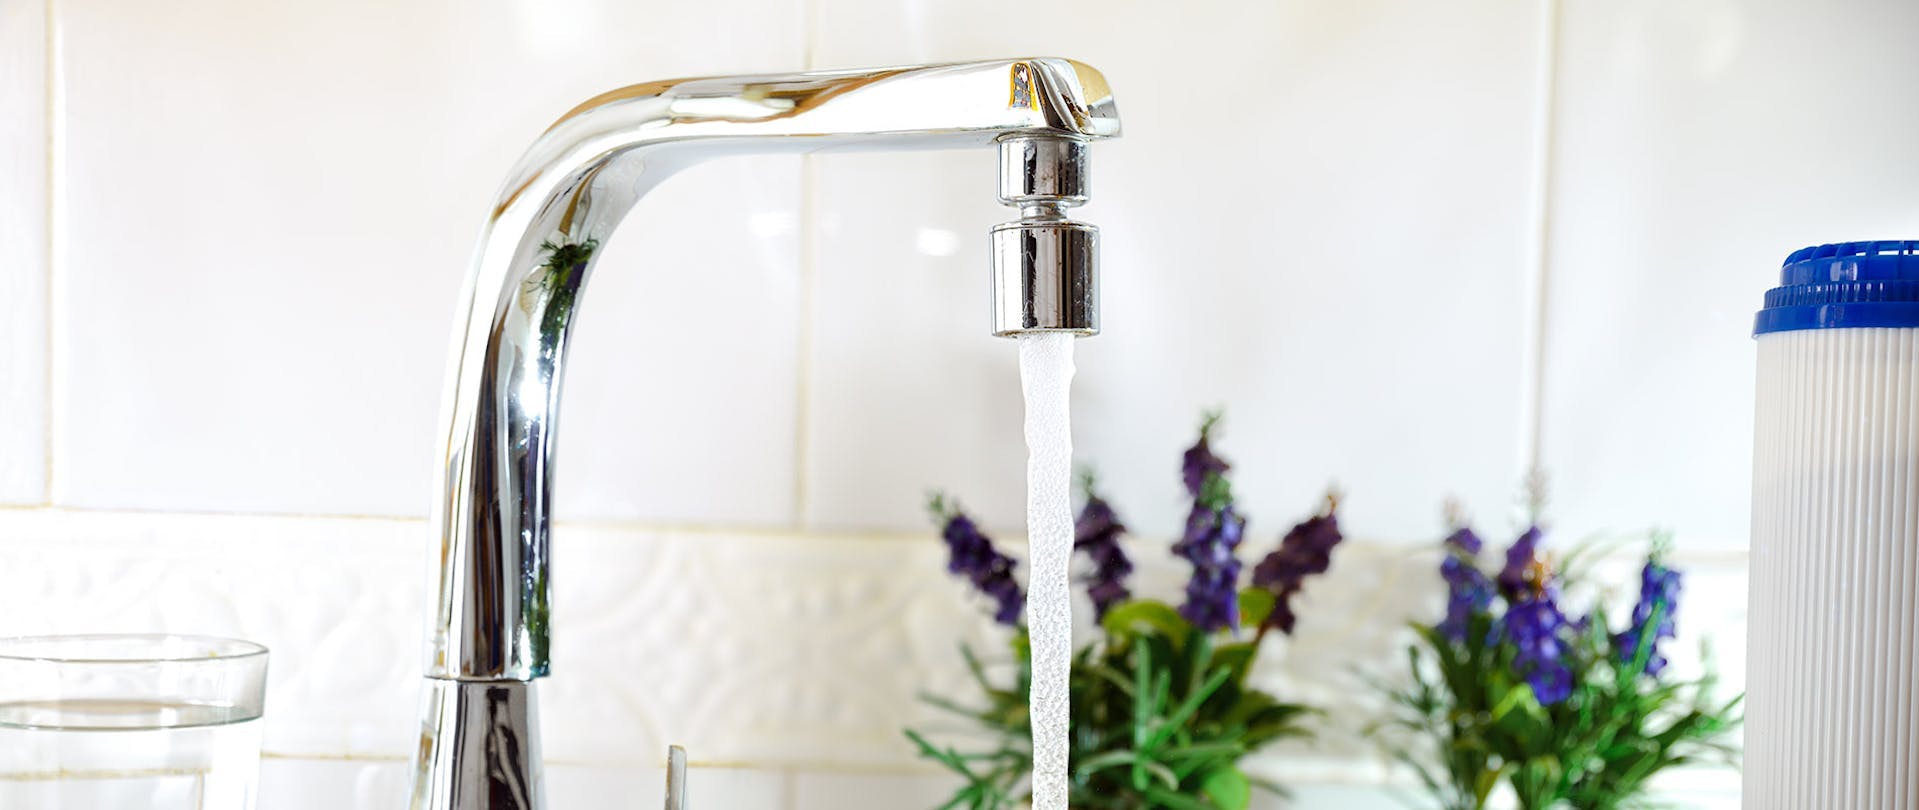 Water Purifier for Home Photo of Faucet Pouring